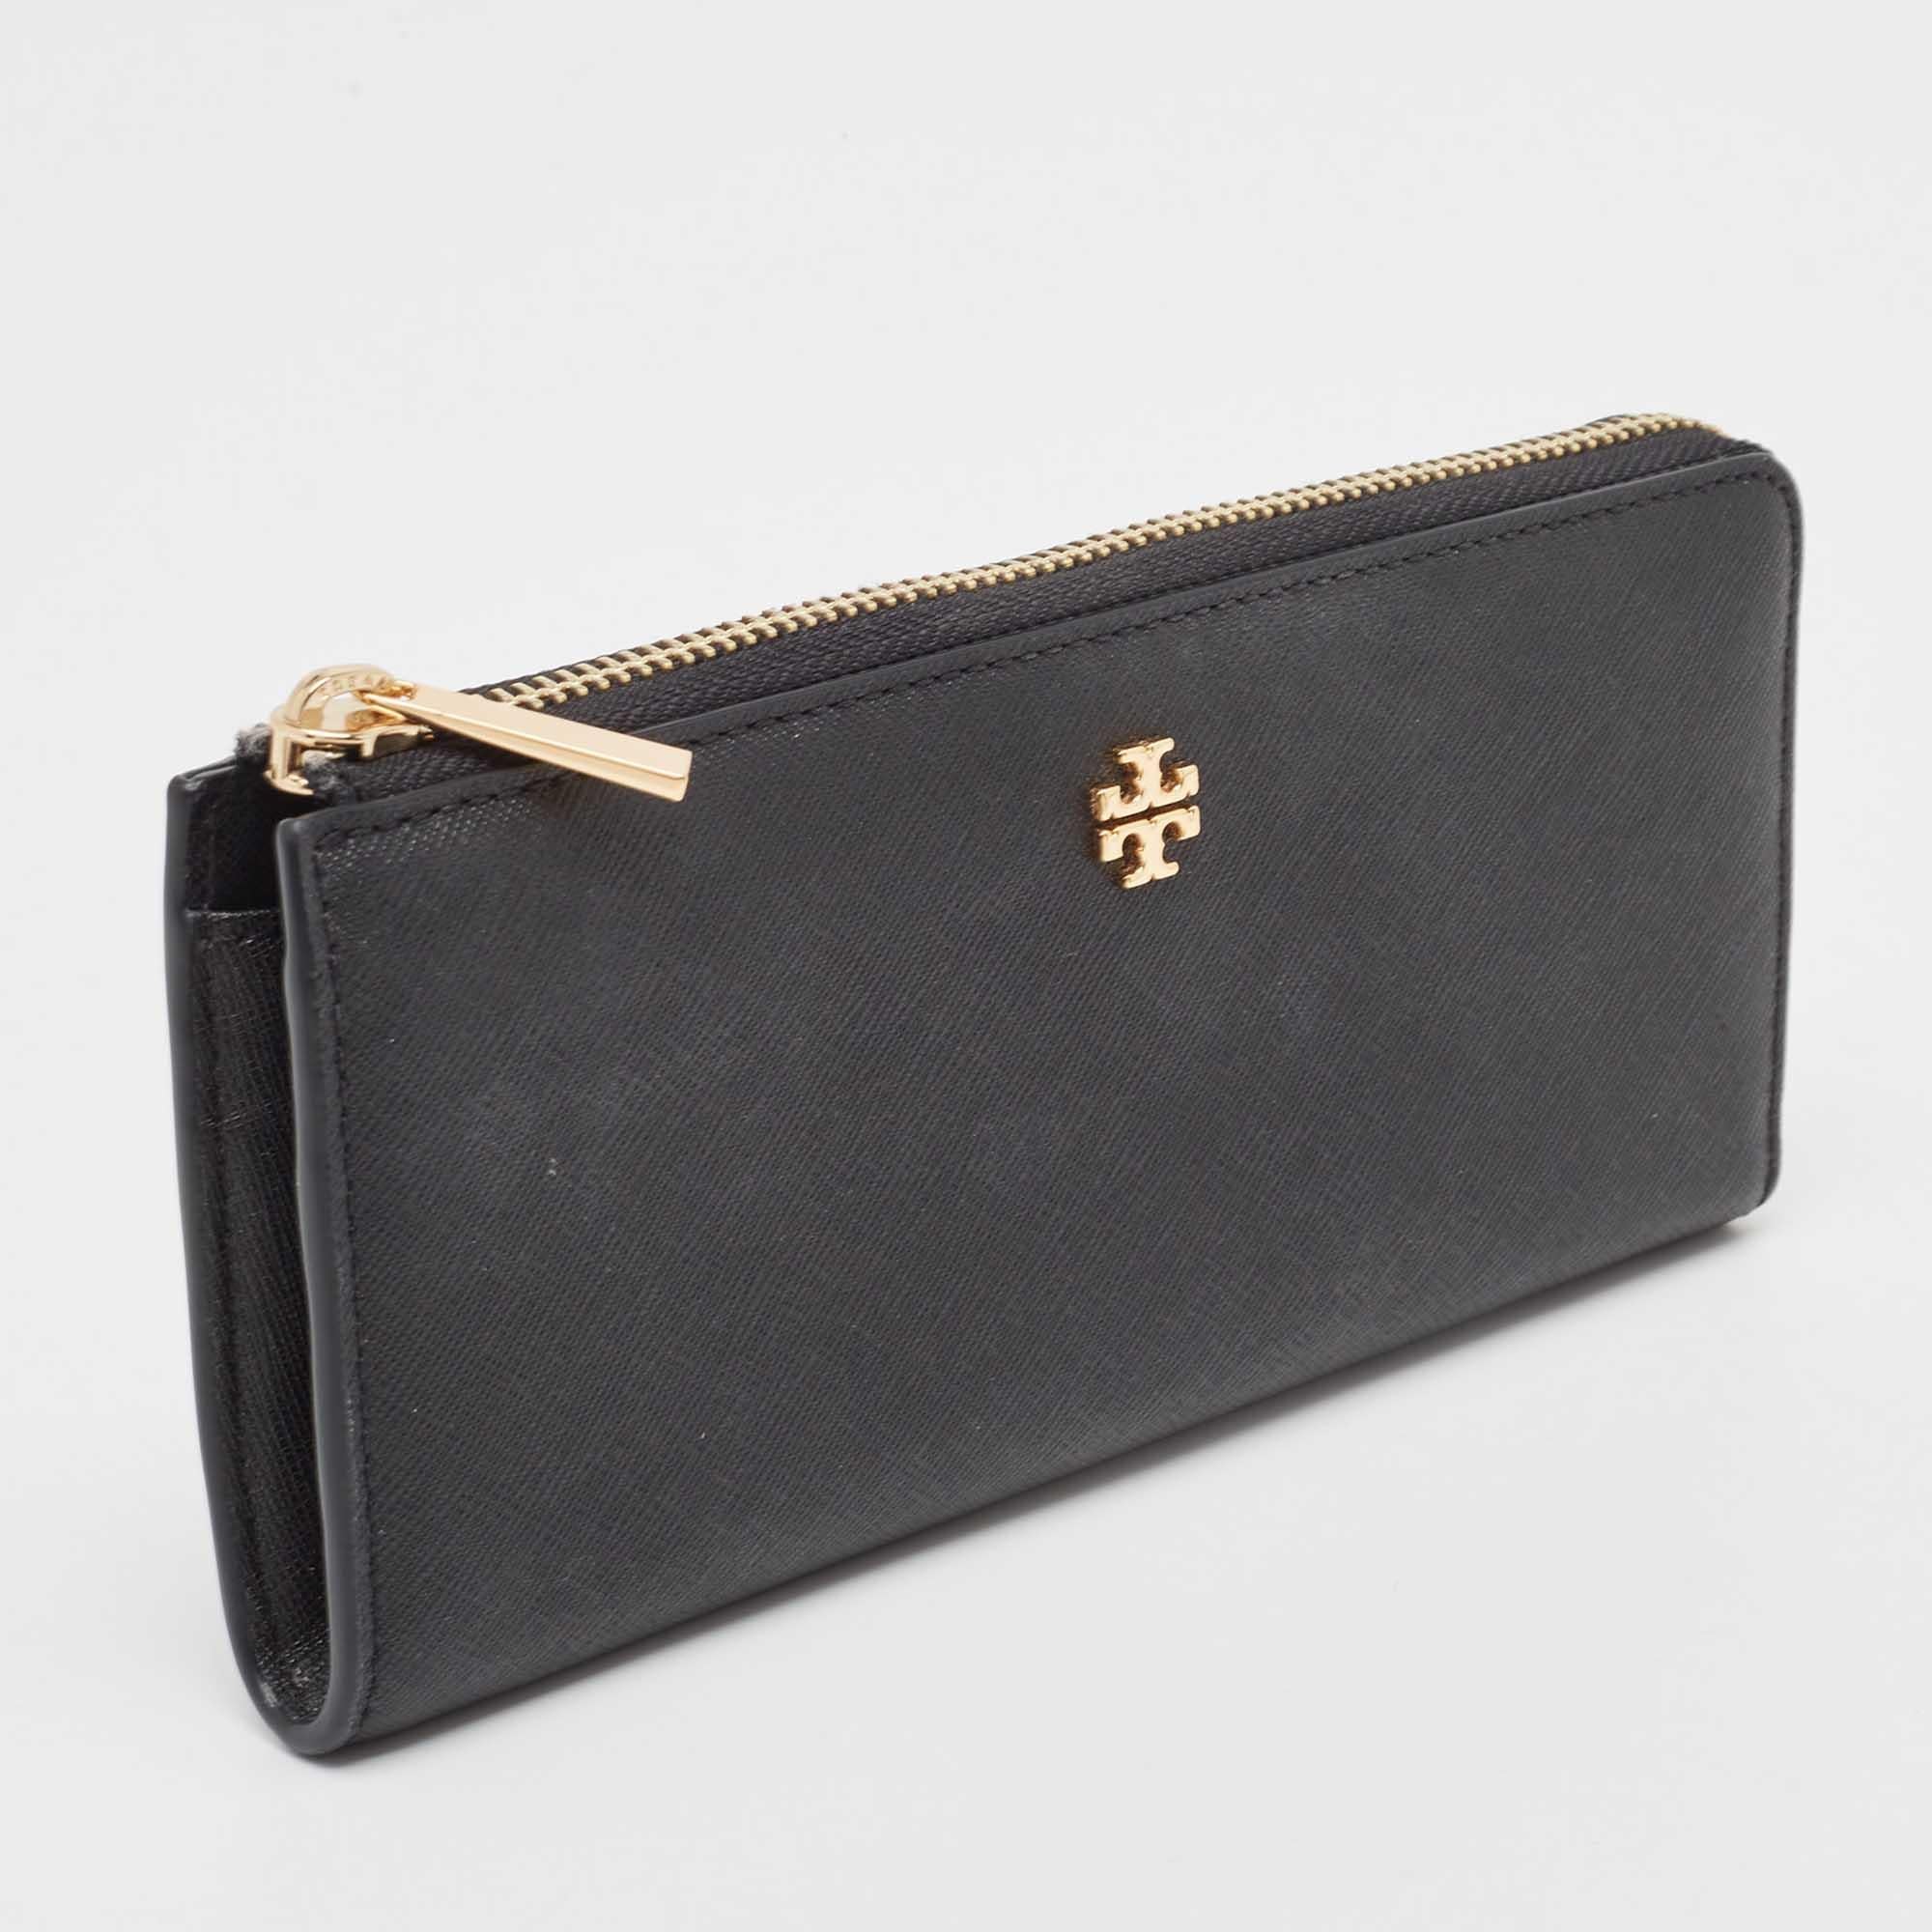 Tory Burch Black Leather Robinson Flap Continental Wallet In Excellent Condition For Sale In Dubai, Al Qouz 2